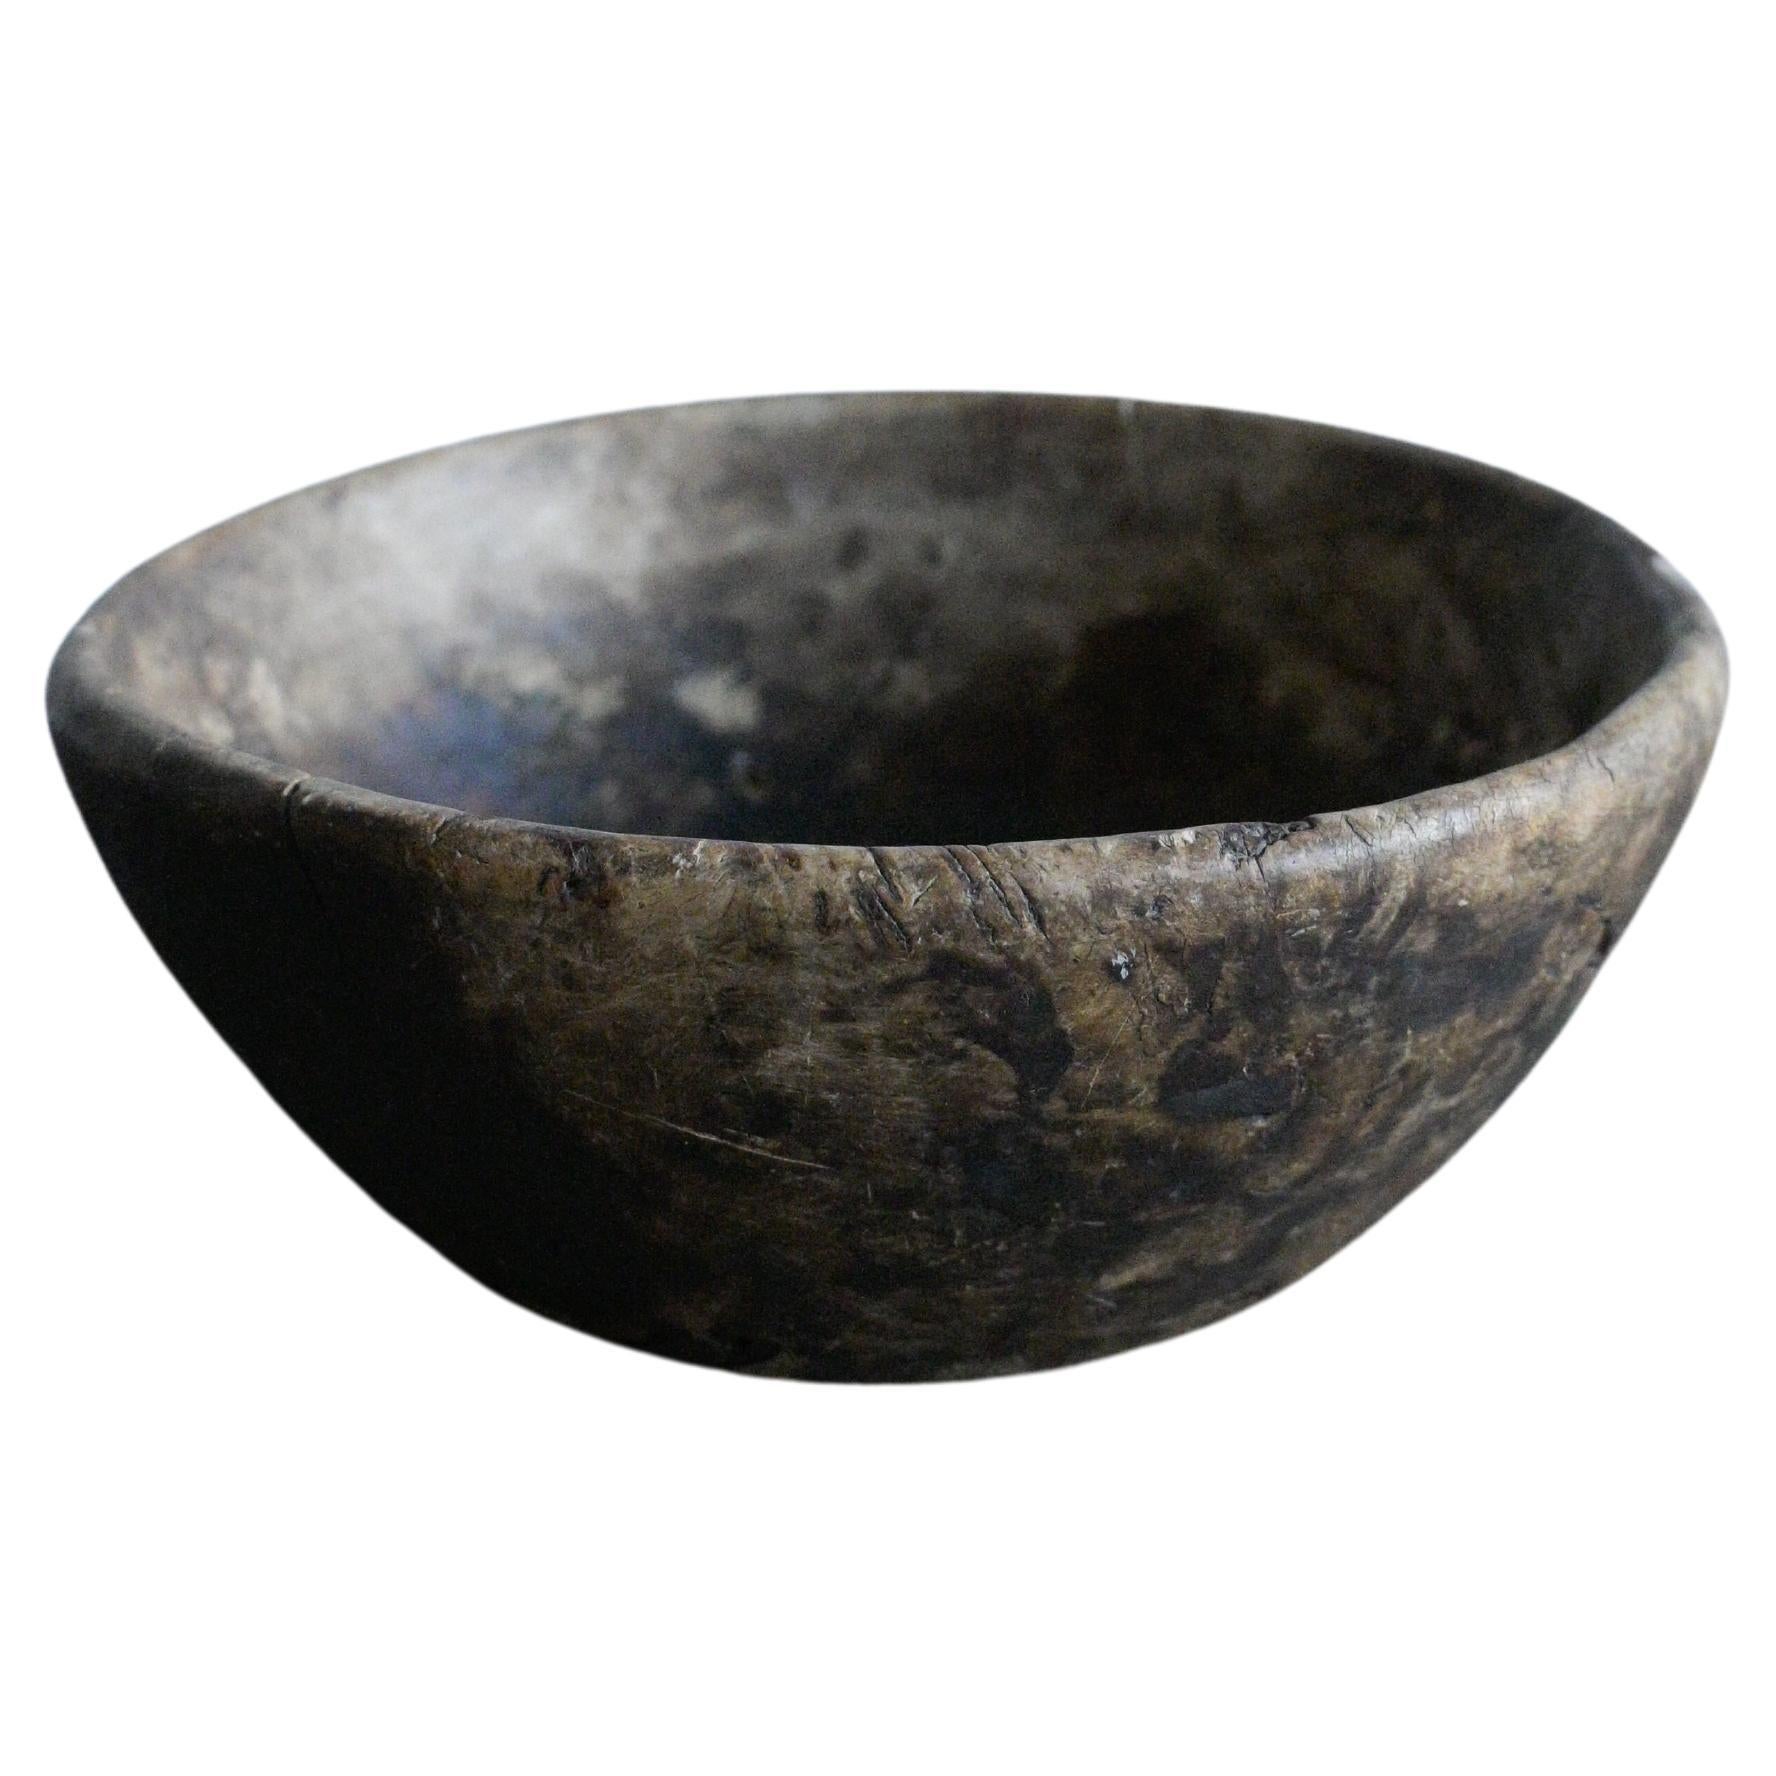 Swedish Root Bowl early 1800 century from Gagnef, Dalarna For Sale